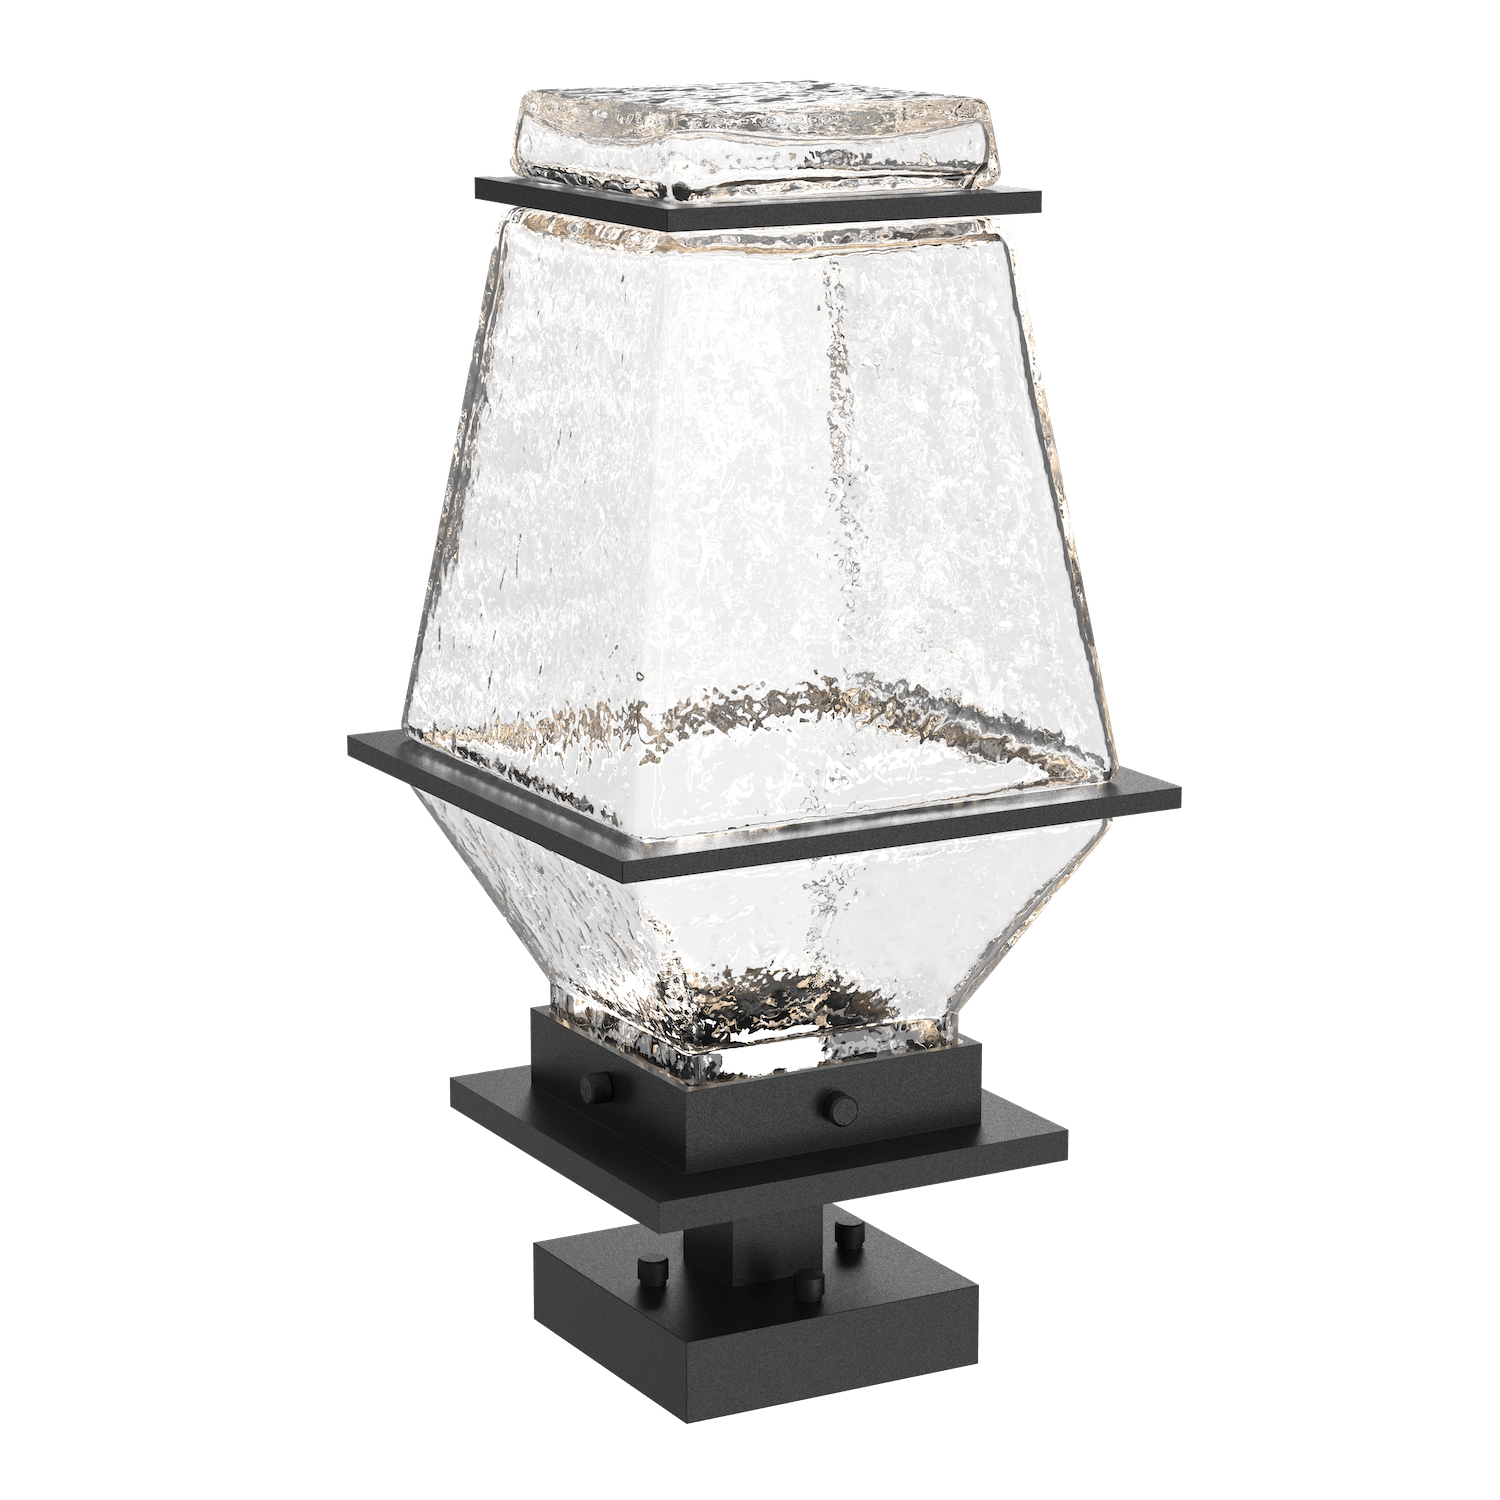 OMB0077-01-TB-C-Hammerton-Studio-Landmark-16-inch-pier-mount-light-with-textured-black-finish-and-clear-blown-glass-shades-and-LED-lamping